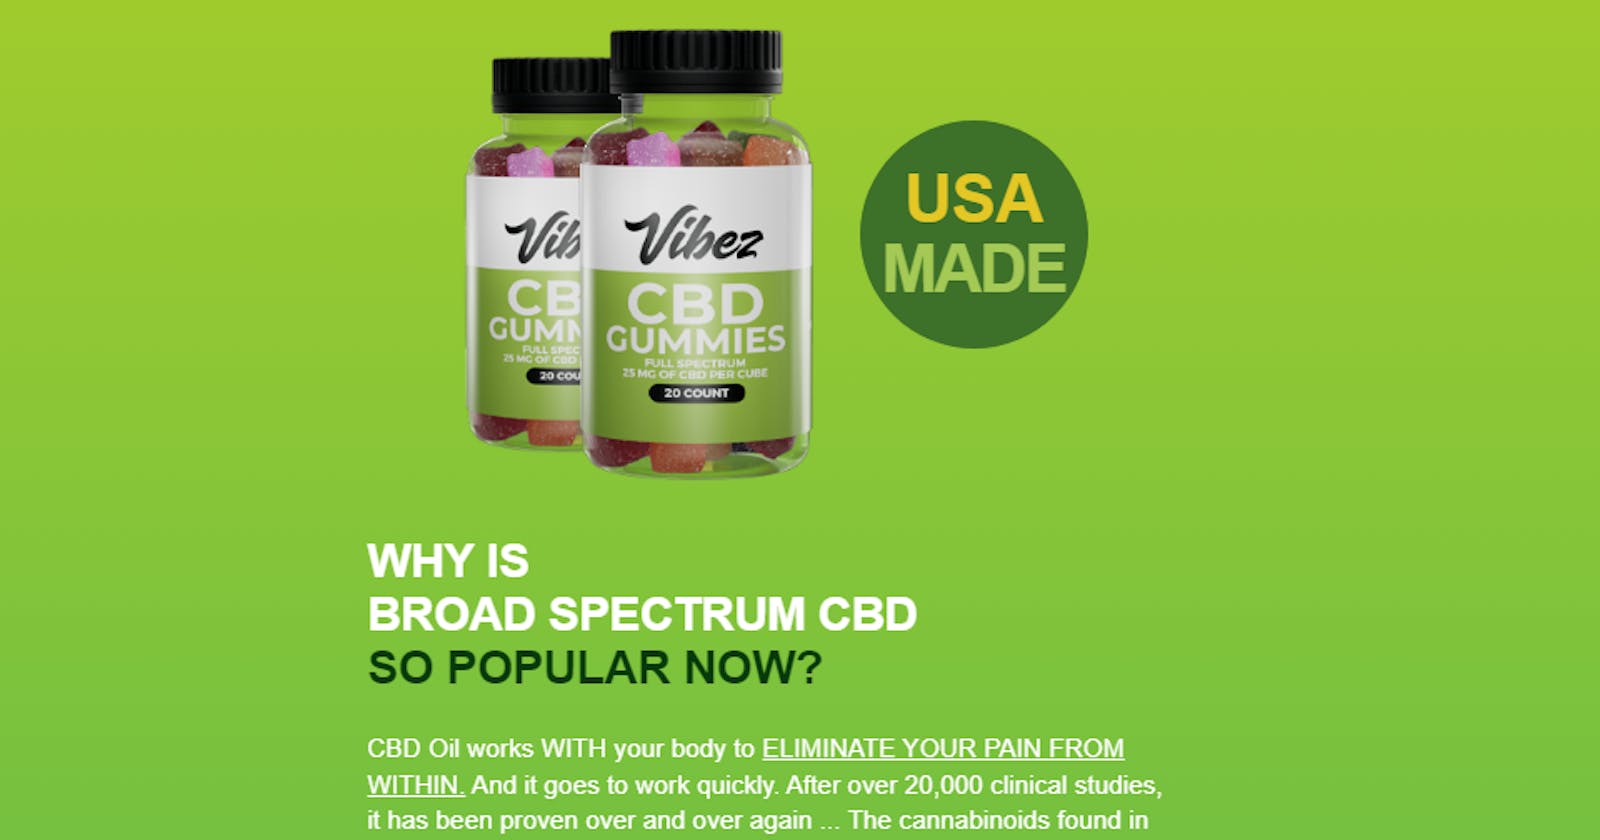 Vibez CBD Gummies THE MOST POPULAR CBD GUMMY BEARS IN UNITED STATES
 READ HERE REVIEWS, BENEFITS, SIDE EFFECT, INGREDIENTS, DOES IT REALLY WORK?